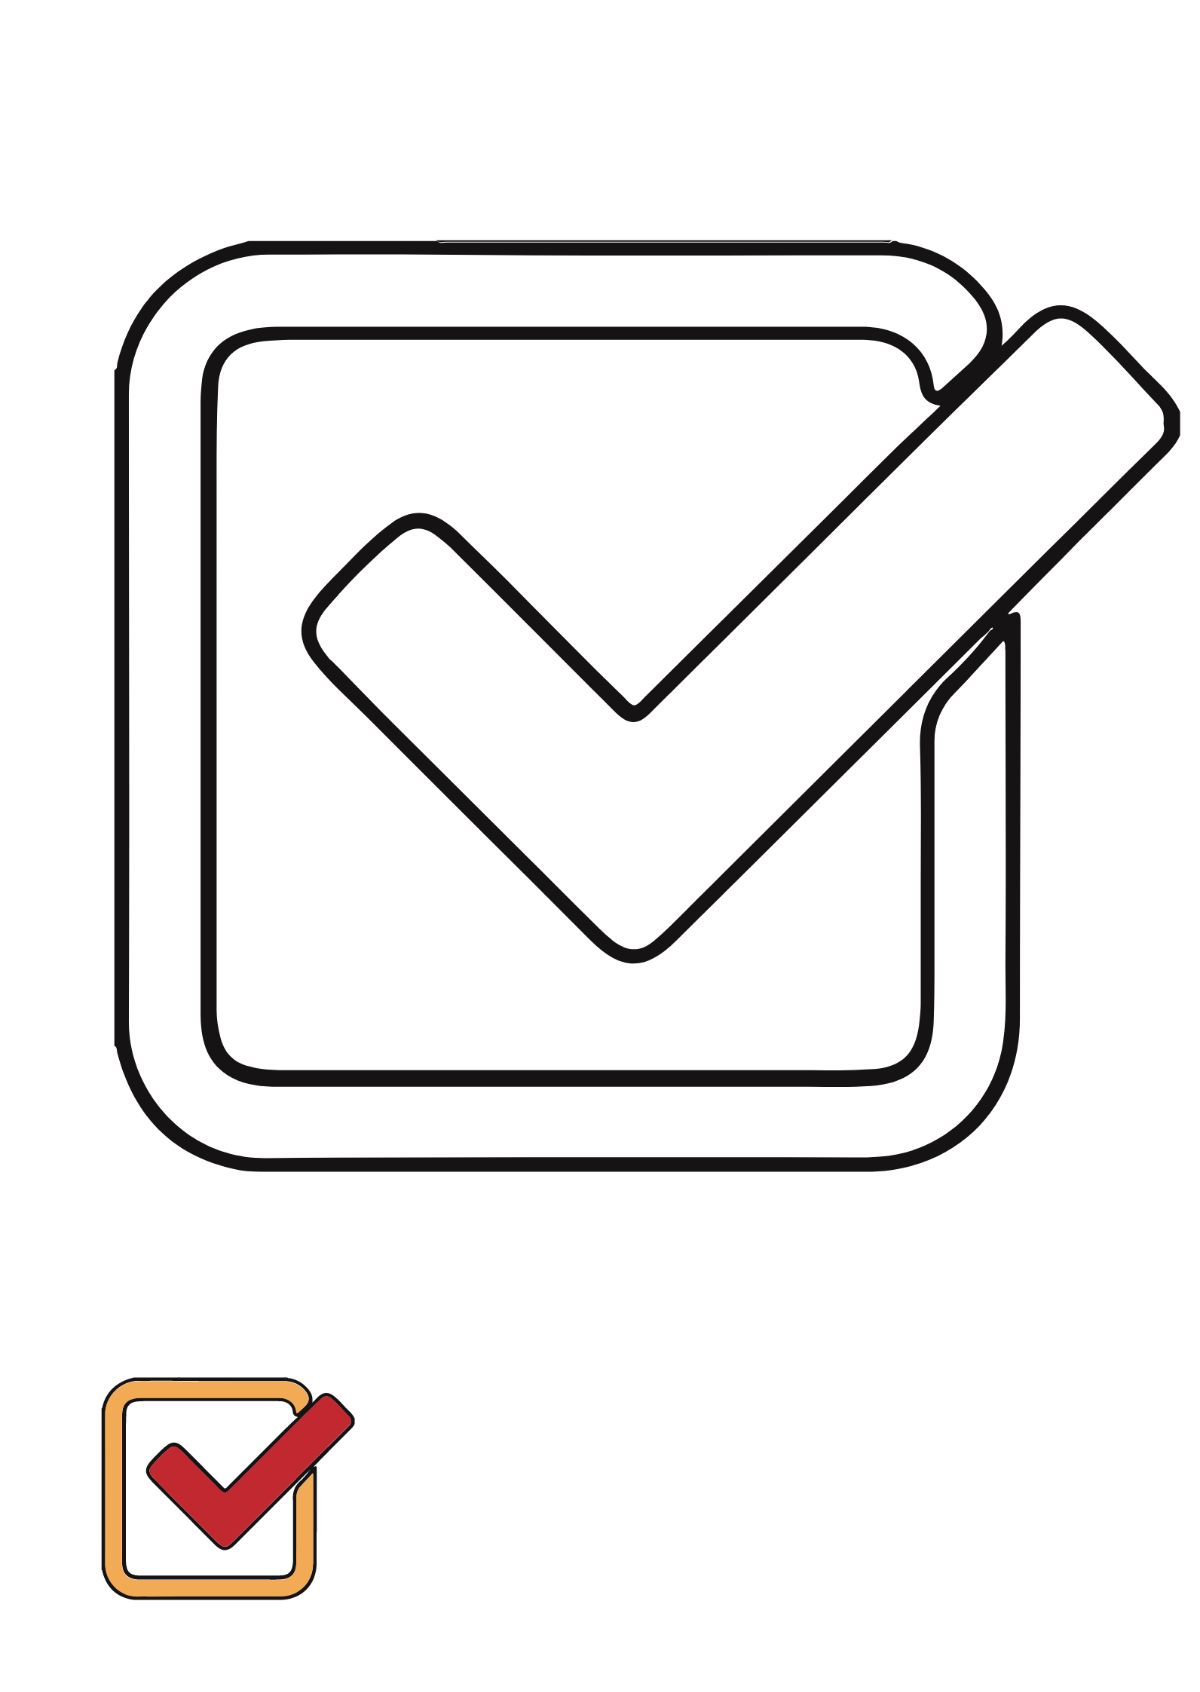 Check Mark Symbol Coloring Page Template